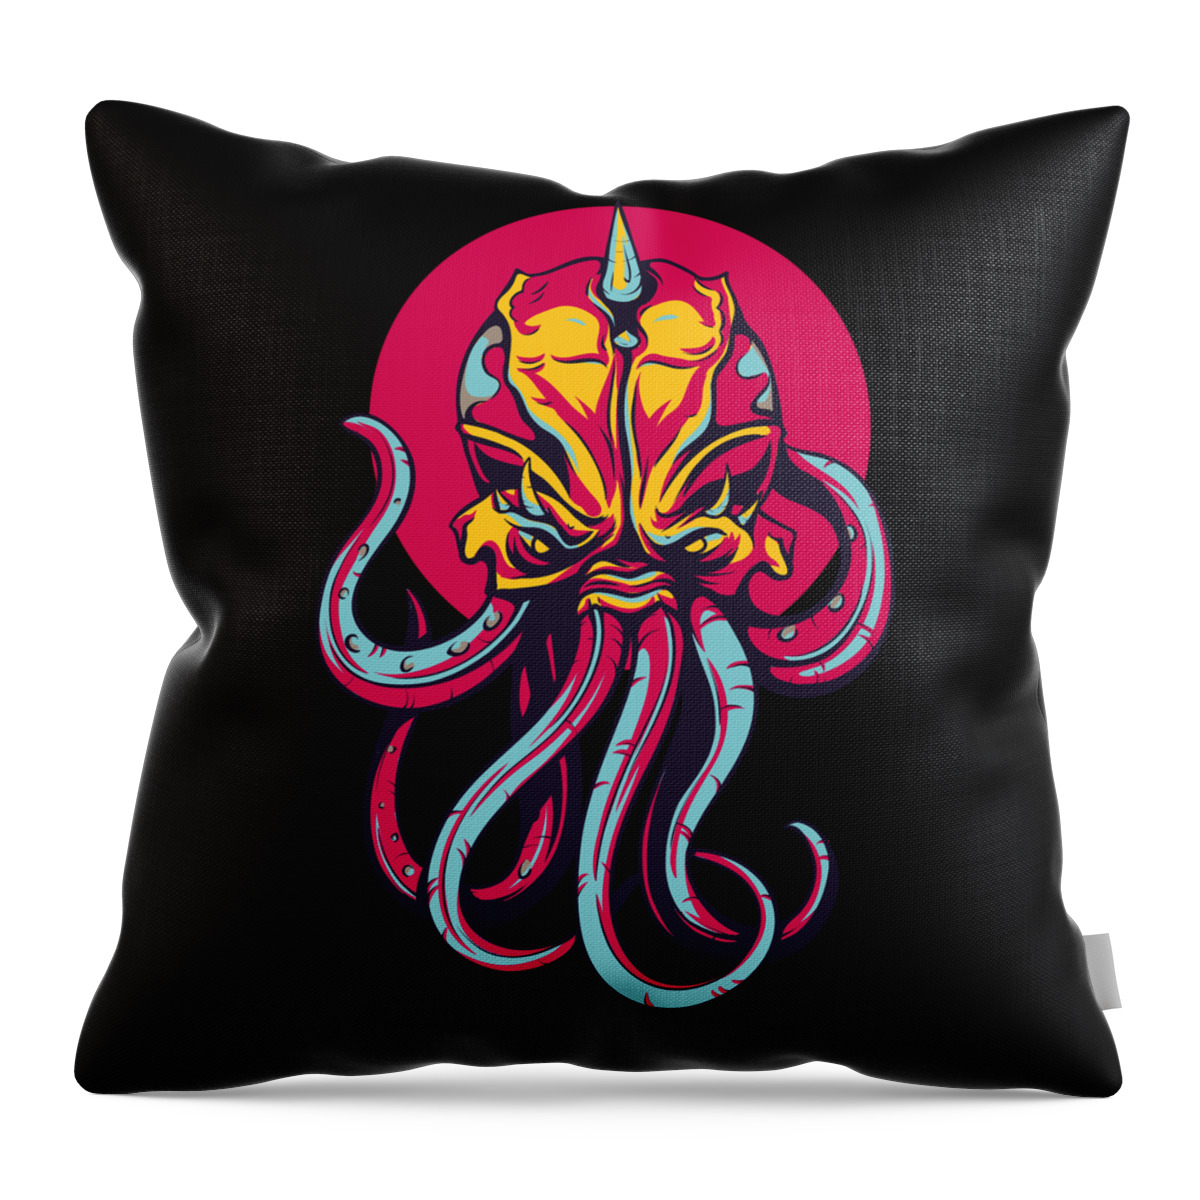 Octopus Throw Pillow featuring the digital art Colorful Octopus Design by Matthias Hauser